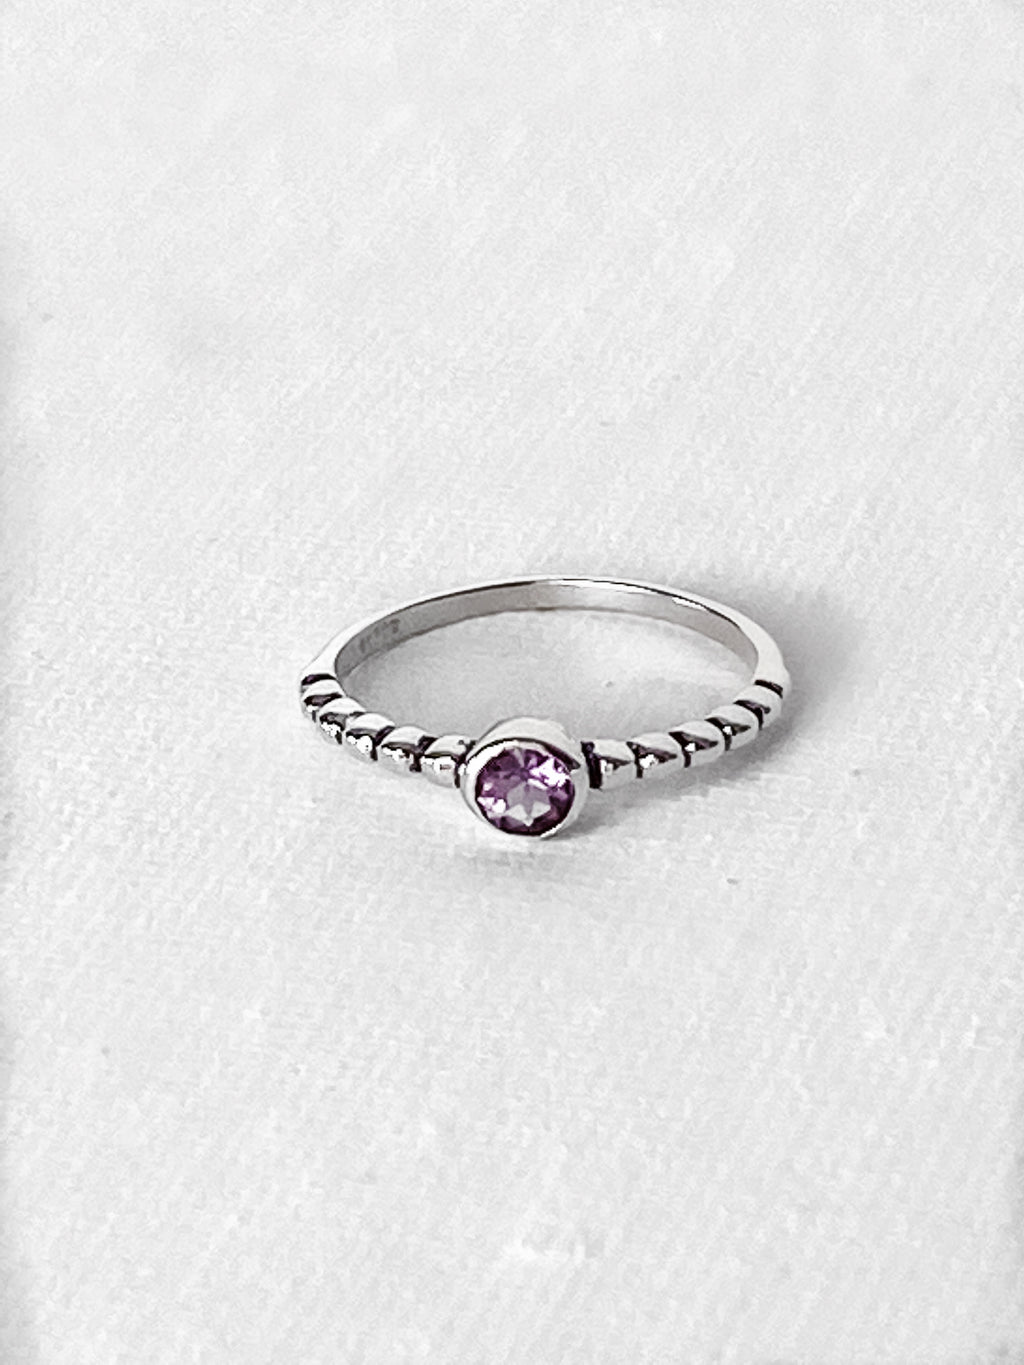 Quantum Reiki Infused Sterling Silver Amethyst Ring Size 7